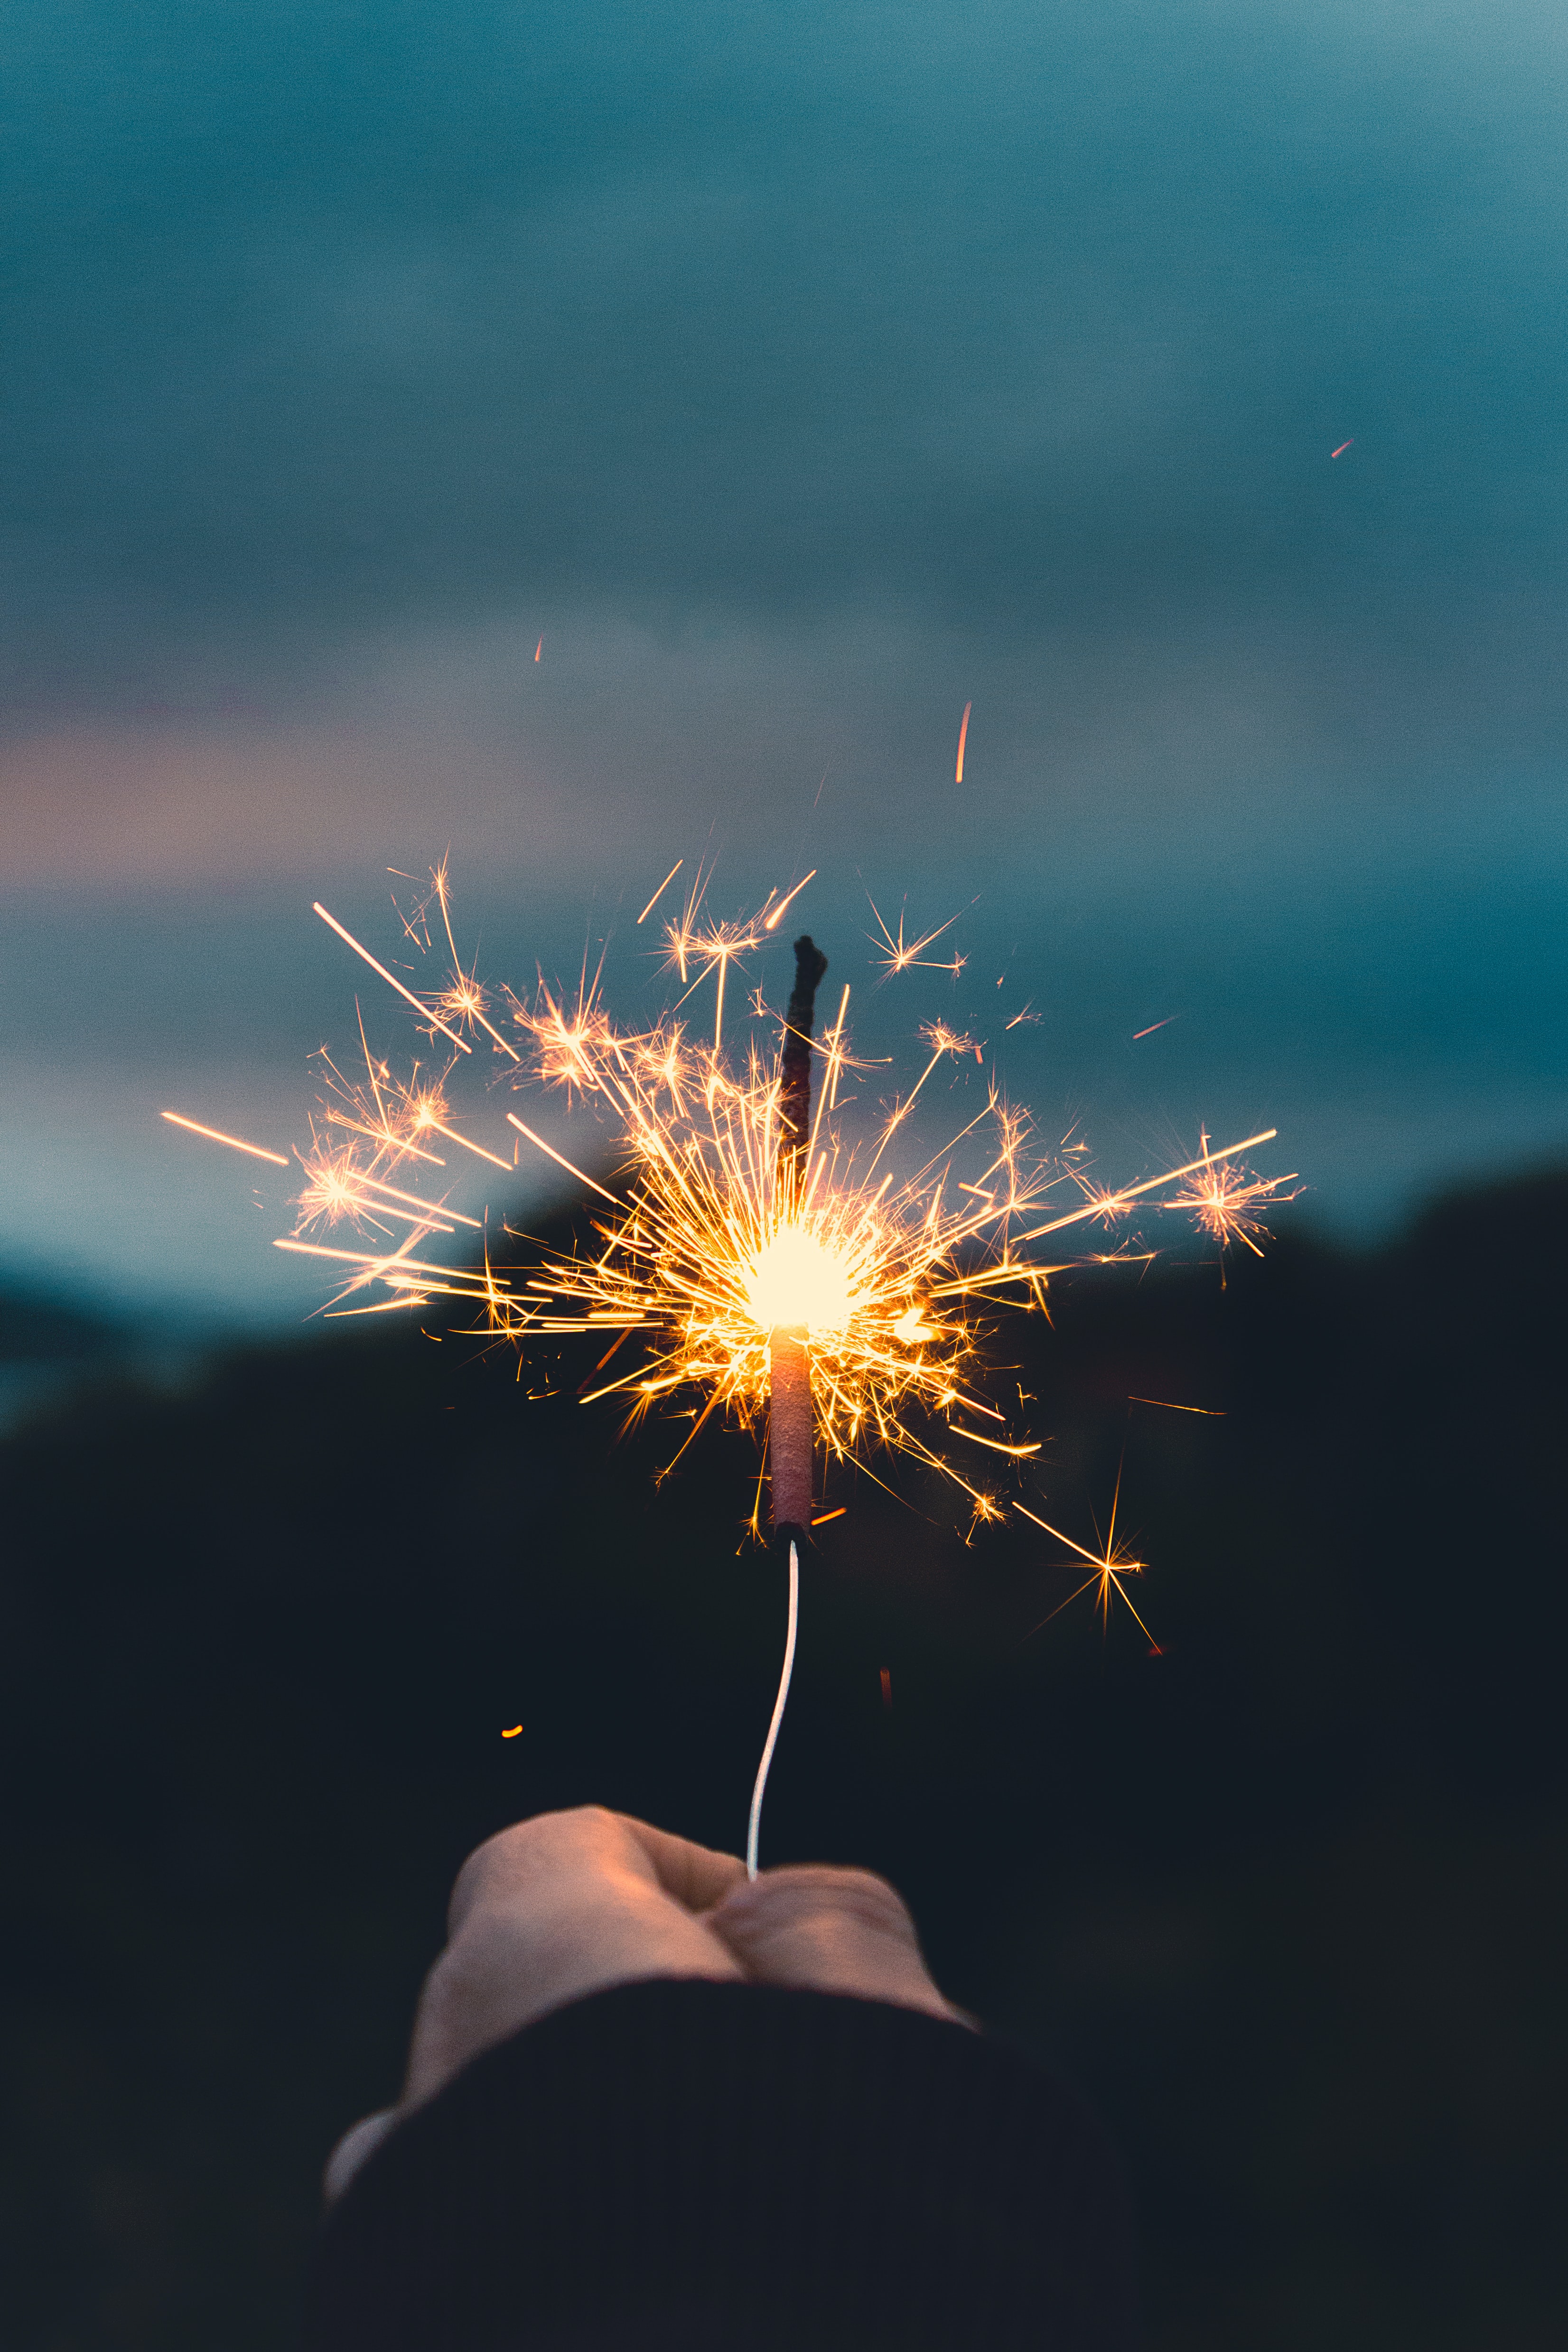 147800 download wallpaper miscellanea, hand, sparks, miscellaneous, sparkler screensavers and pictures for free